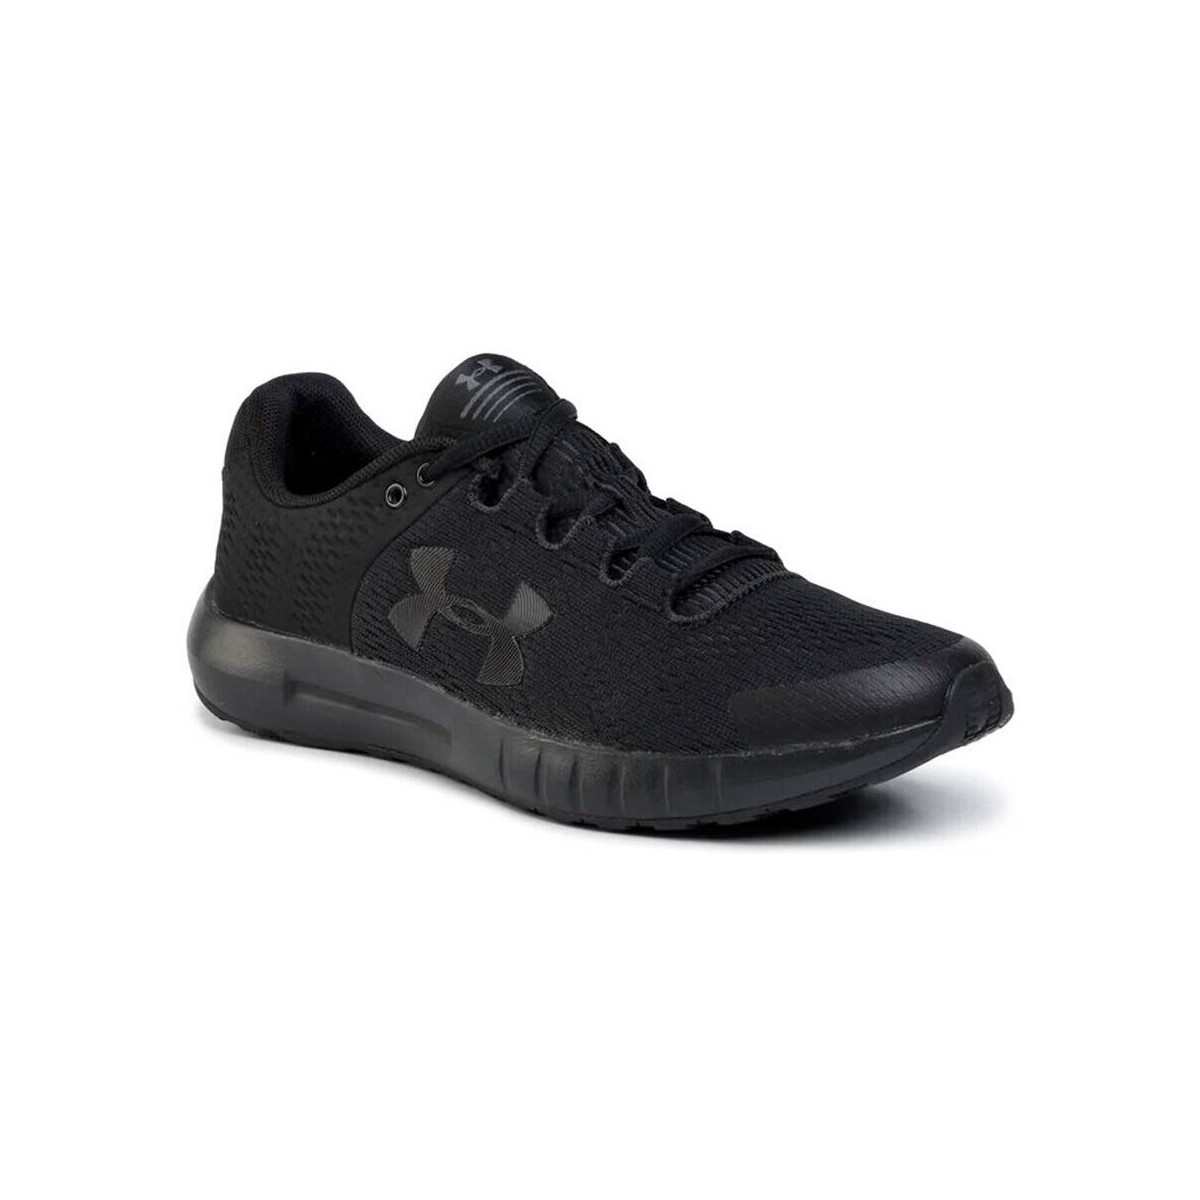 Under Armour Charged Rogue 3 Knit Black